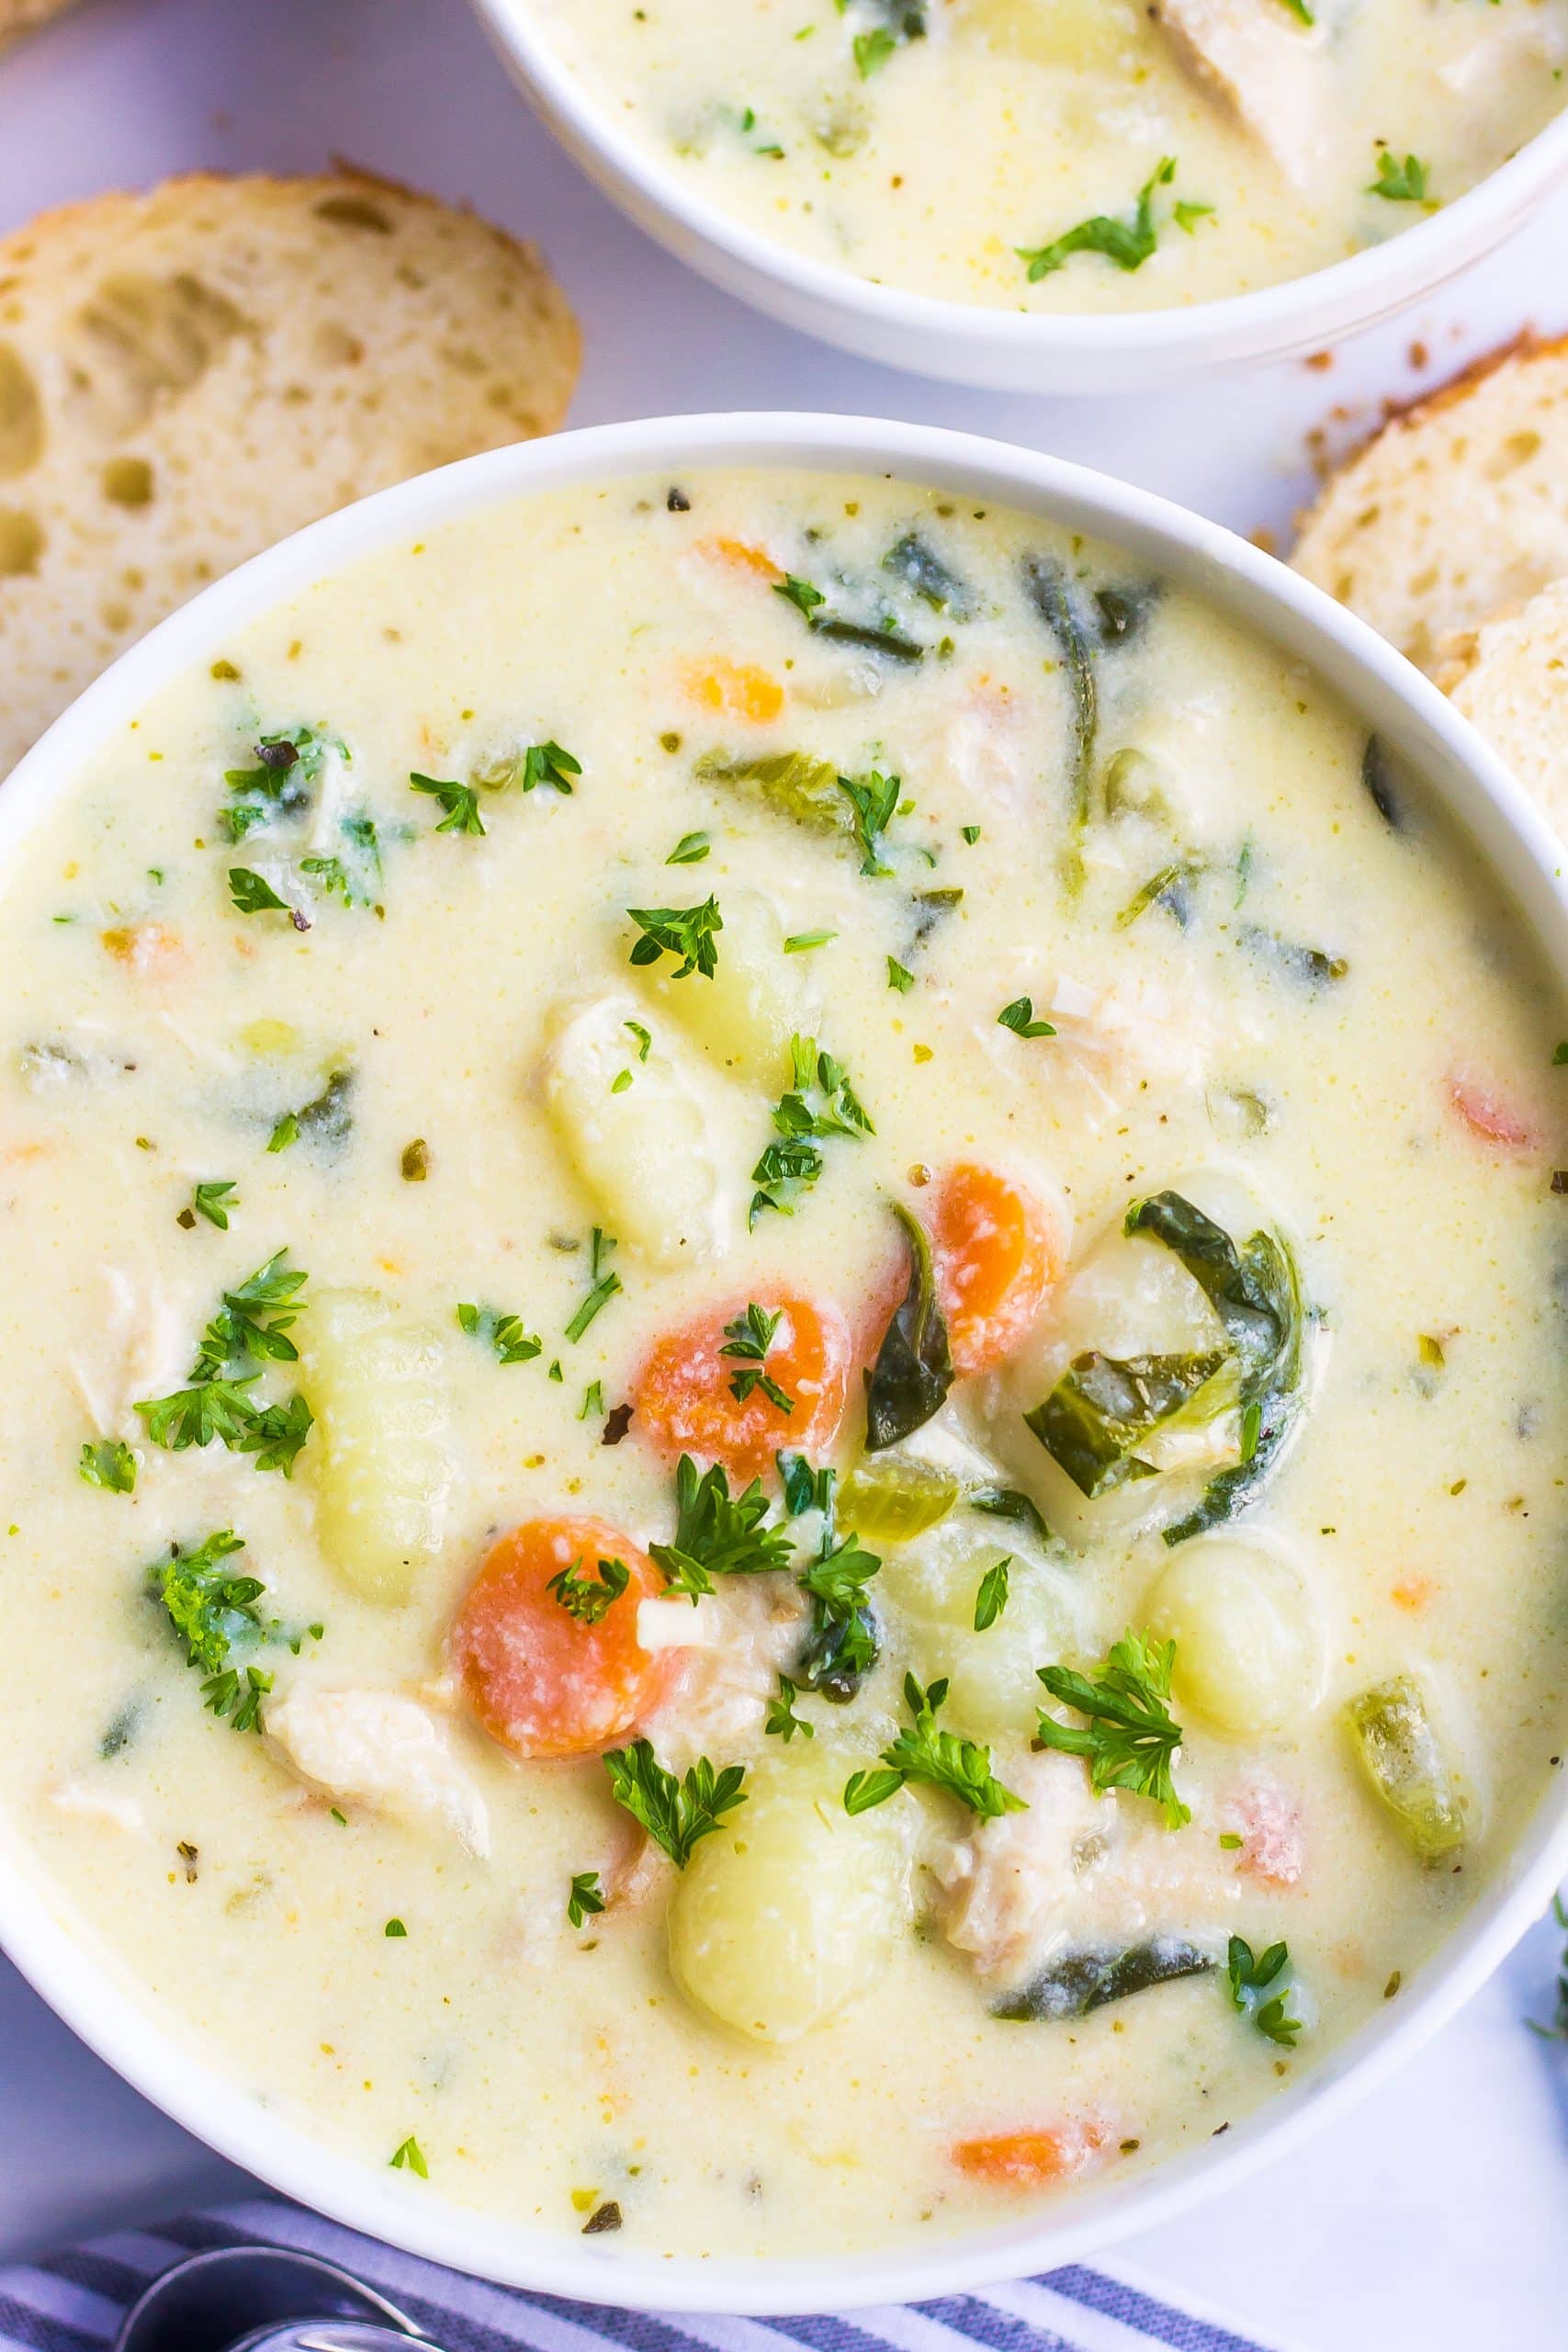 one bowl of chicken gnocchi soup with carrots and parsley